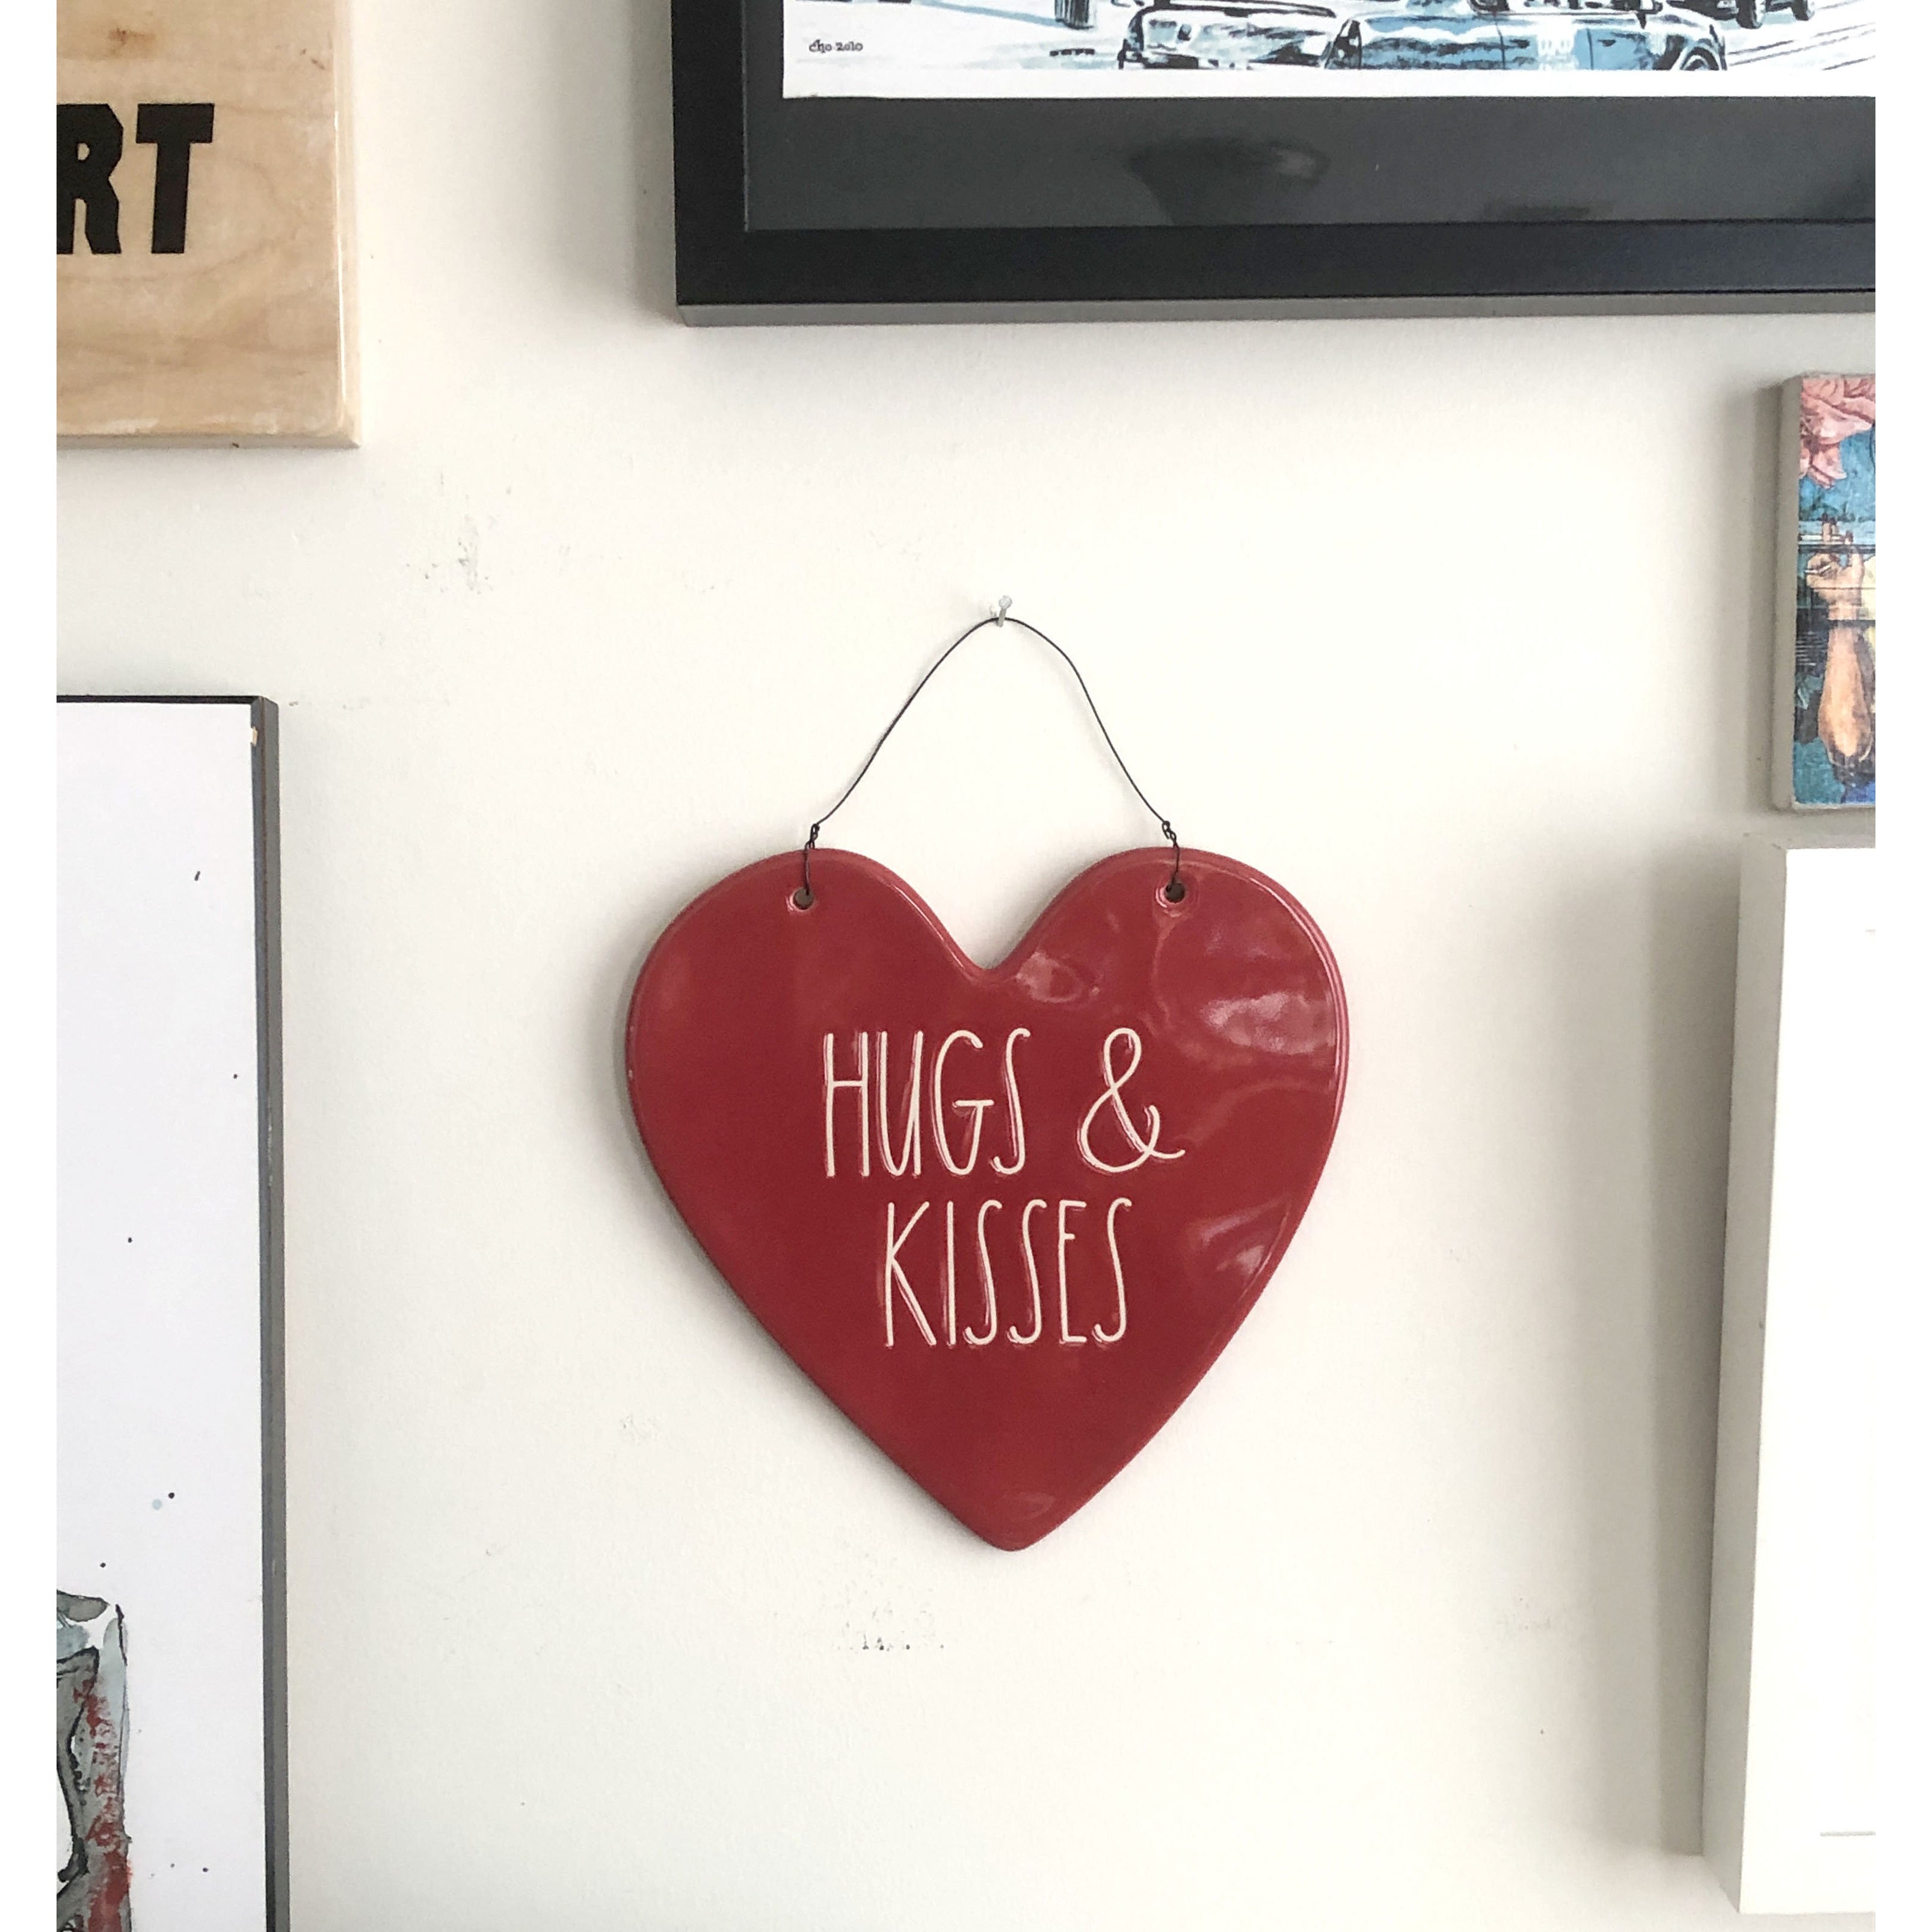 Rae Dunn Heart Shaped Ceramic Wall Hanging in Red with Hugs & Kisses in White Font